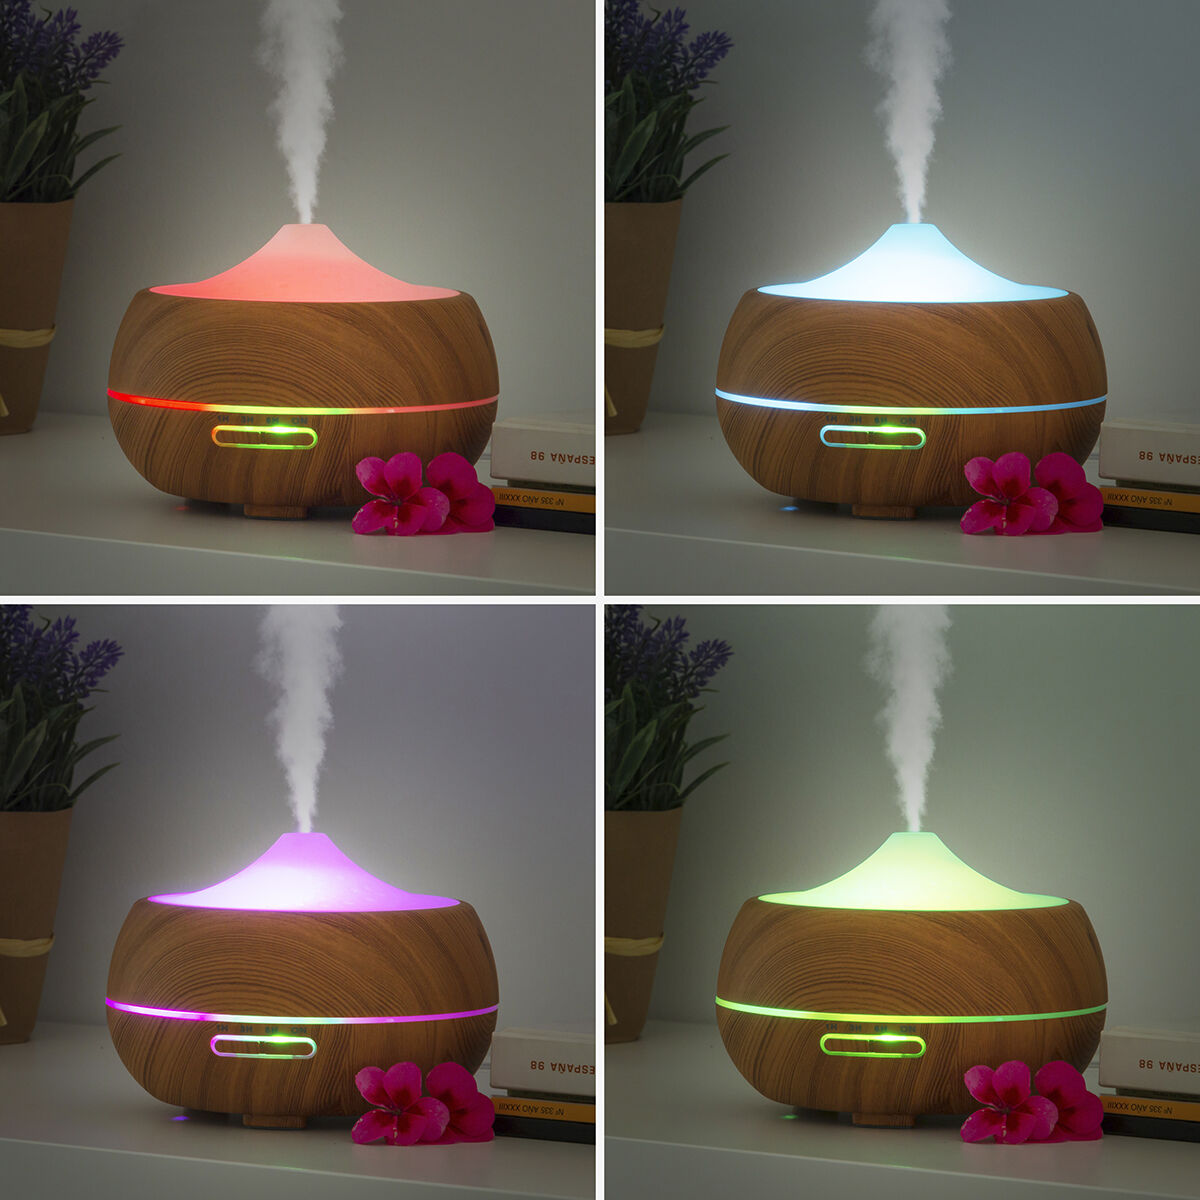 Kaufe Luftbefeuchter Aroma Diffusor Multicolor-LED Wooden-Effect InnovaGoods bei AWK Flagship um € 46.00